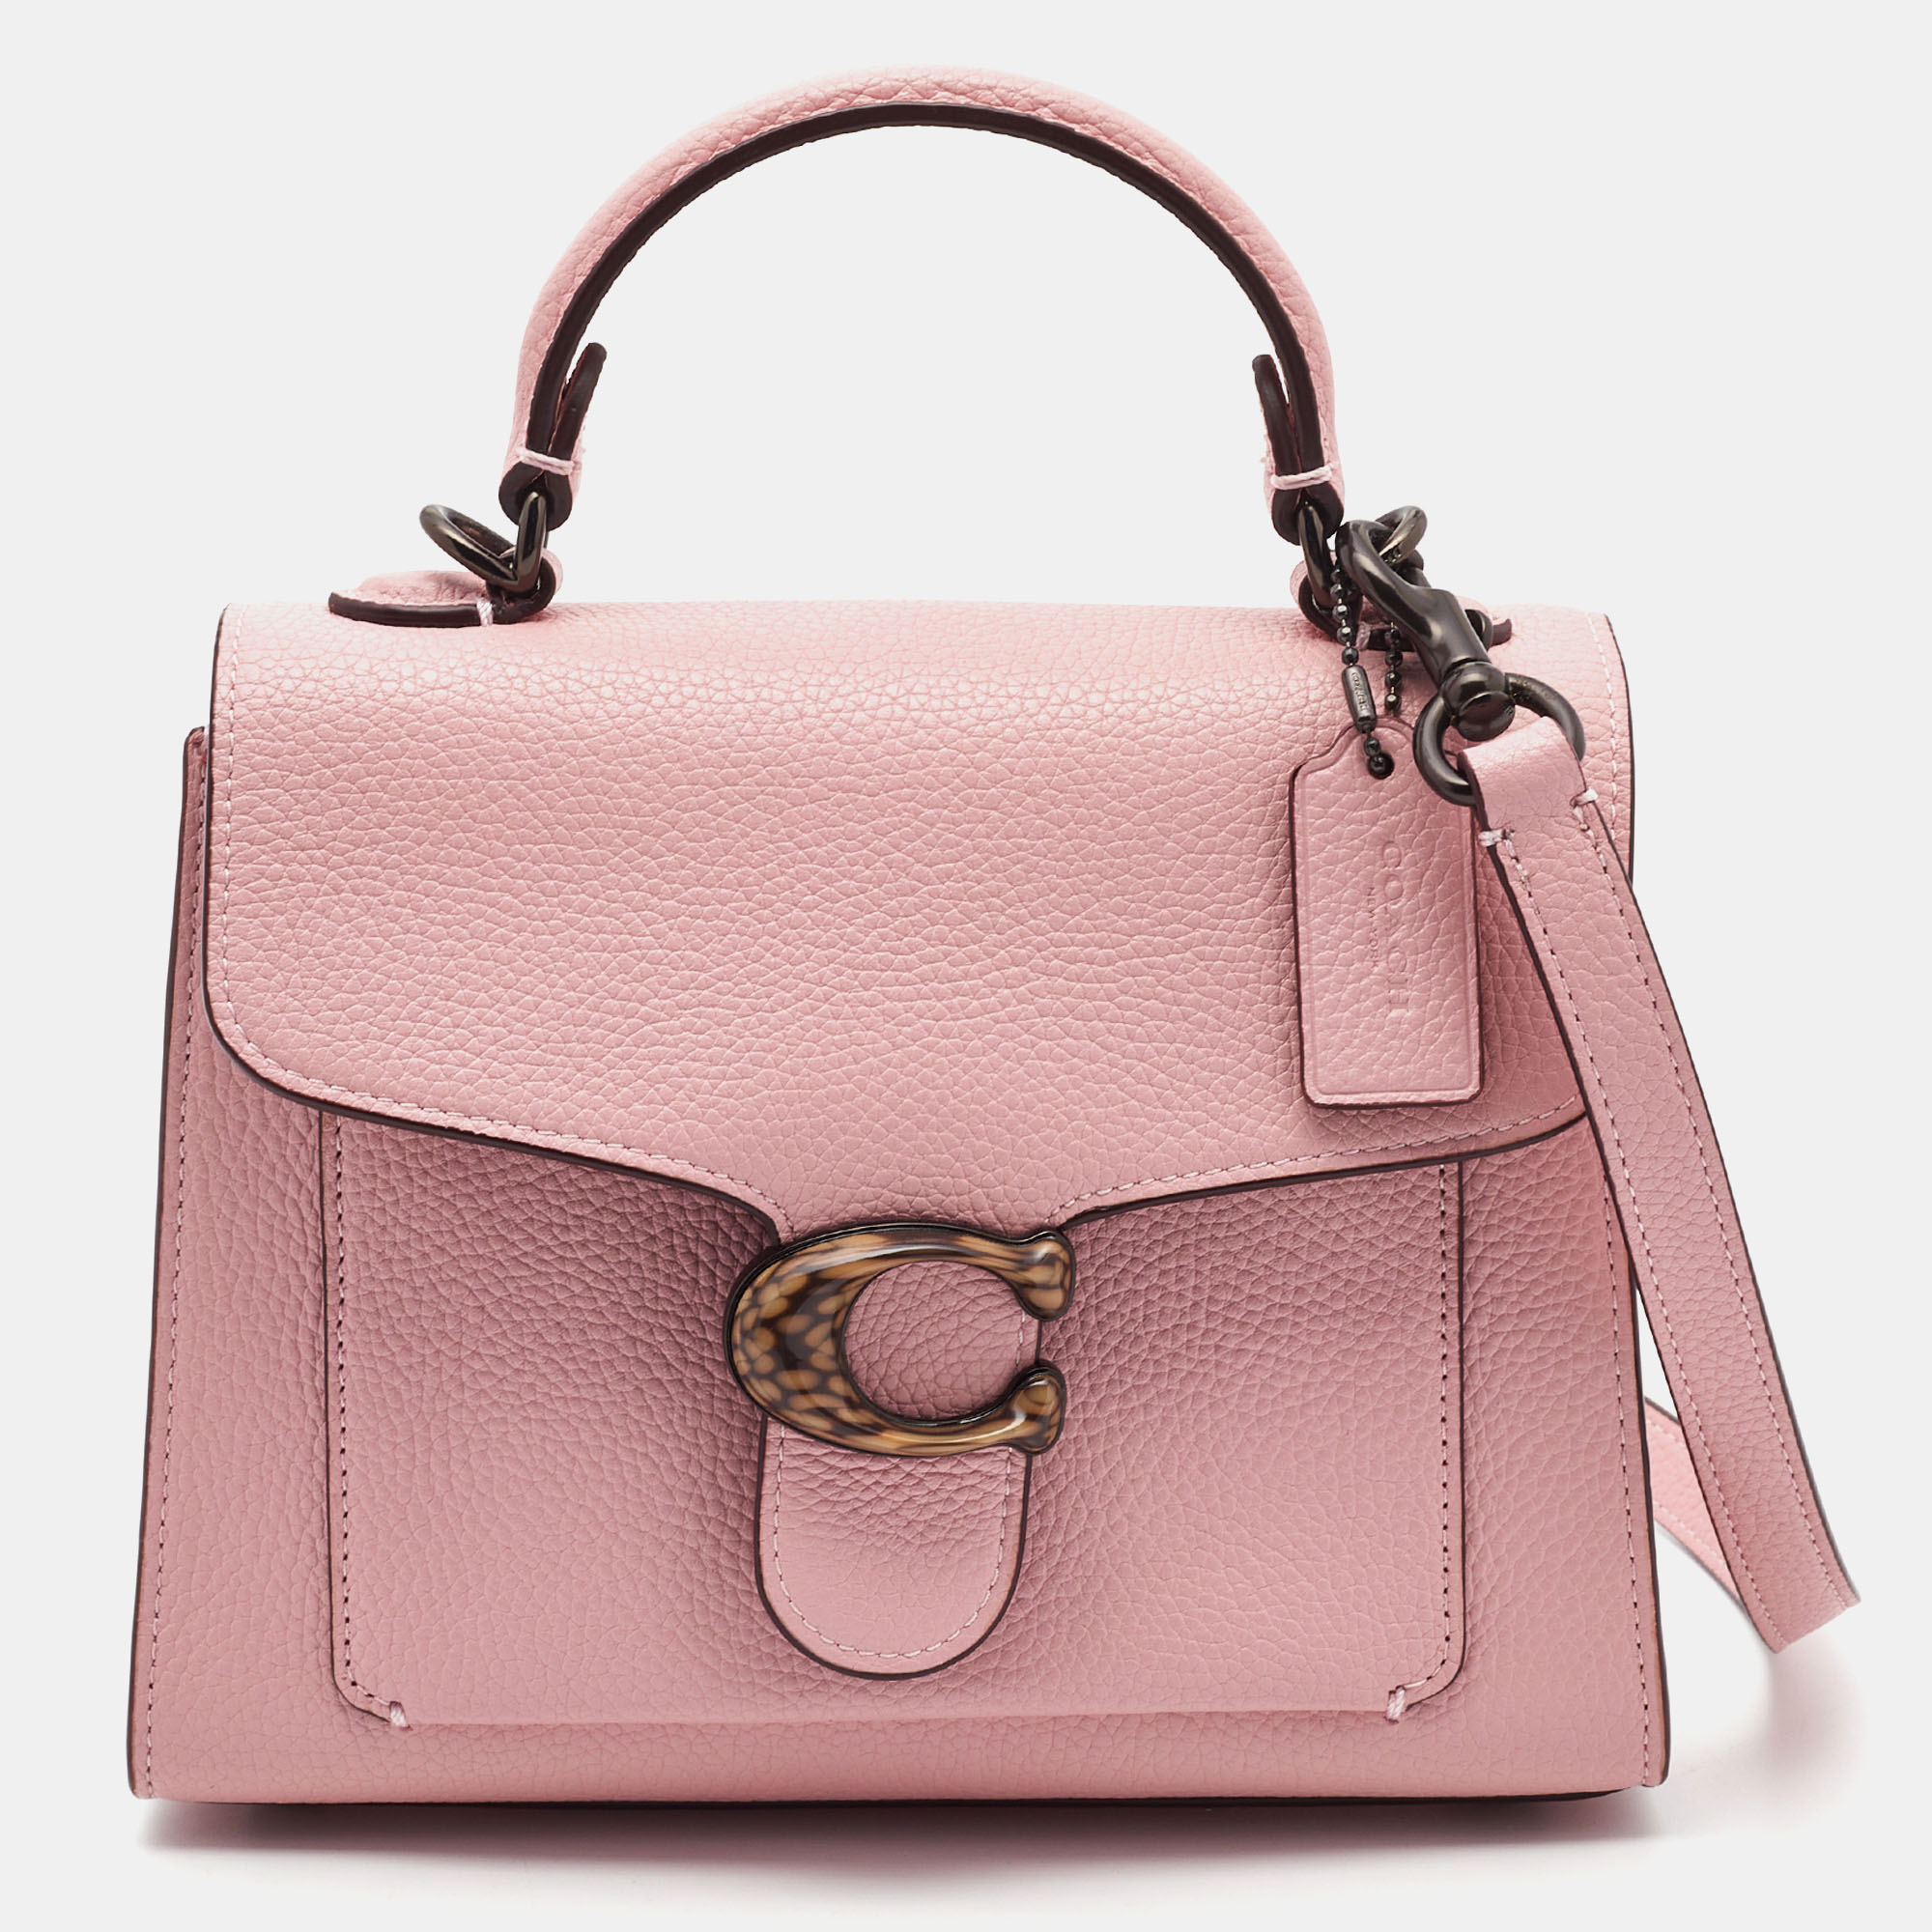 Coach Pink Leather Tabby Top Handle Bag